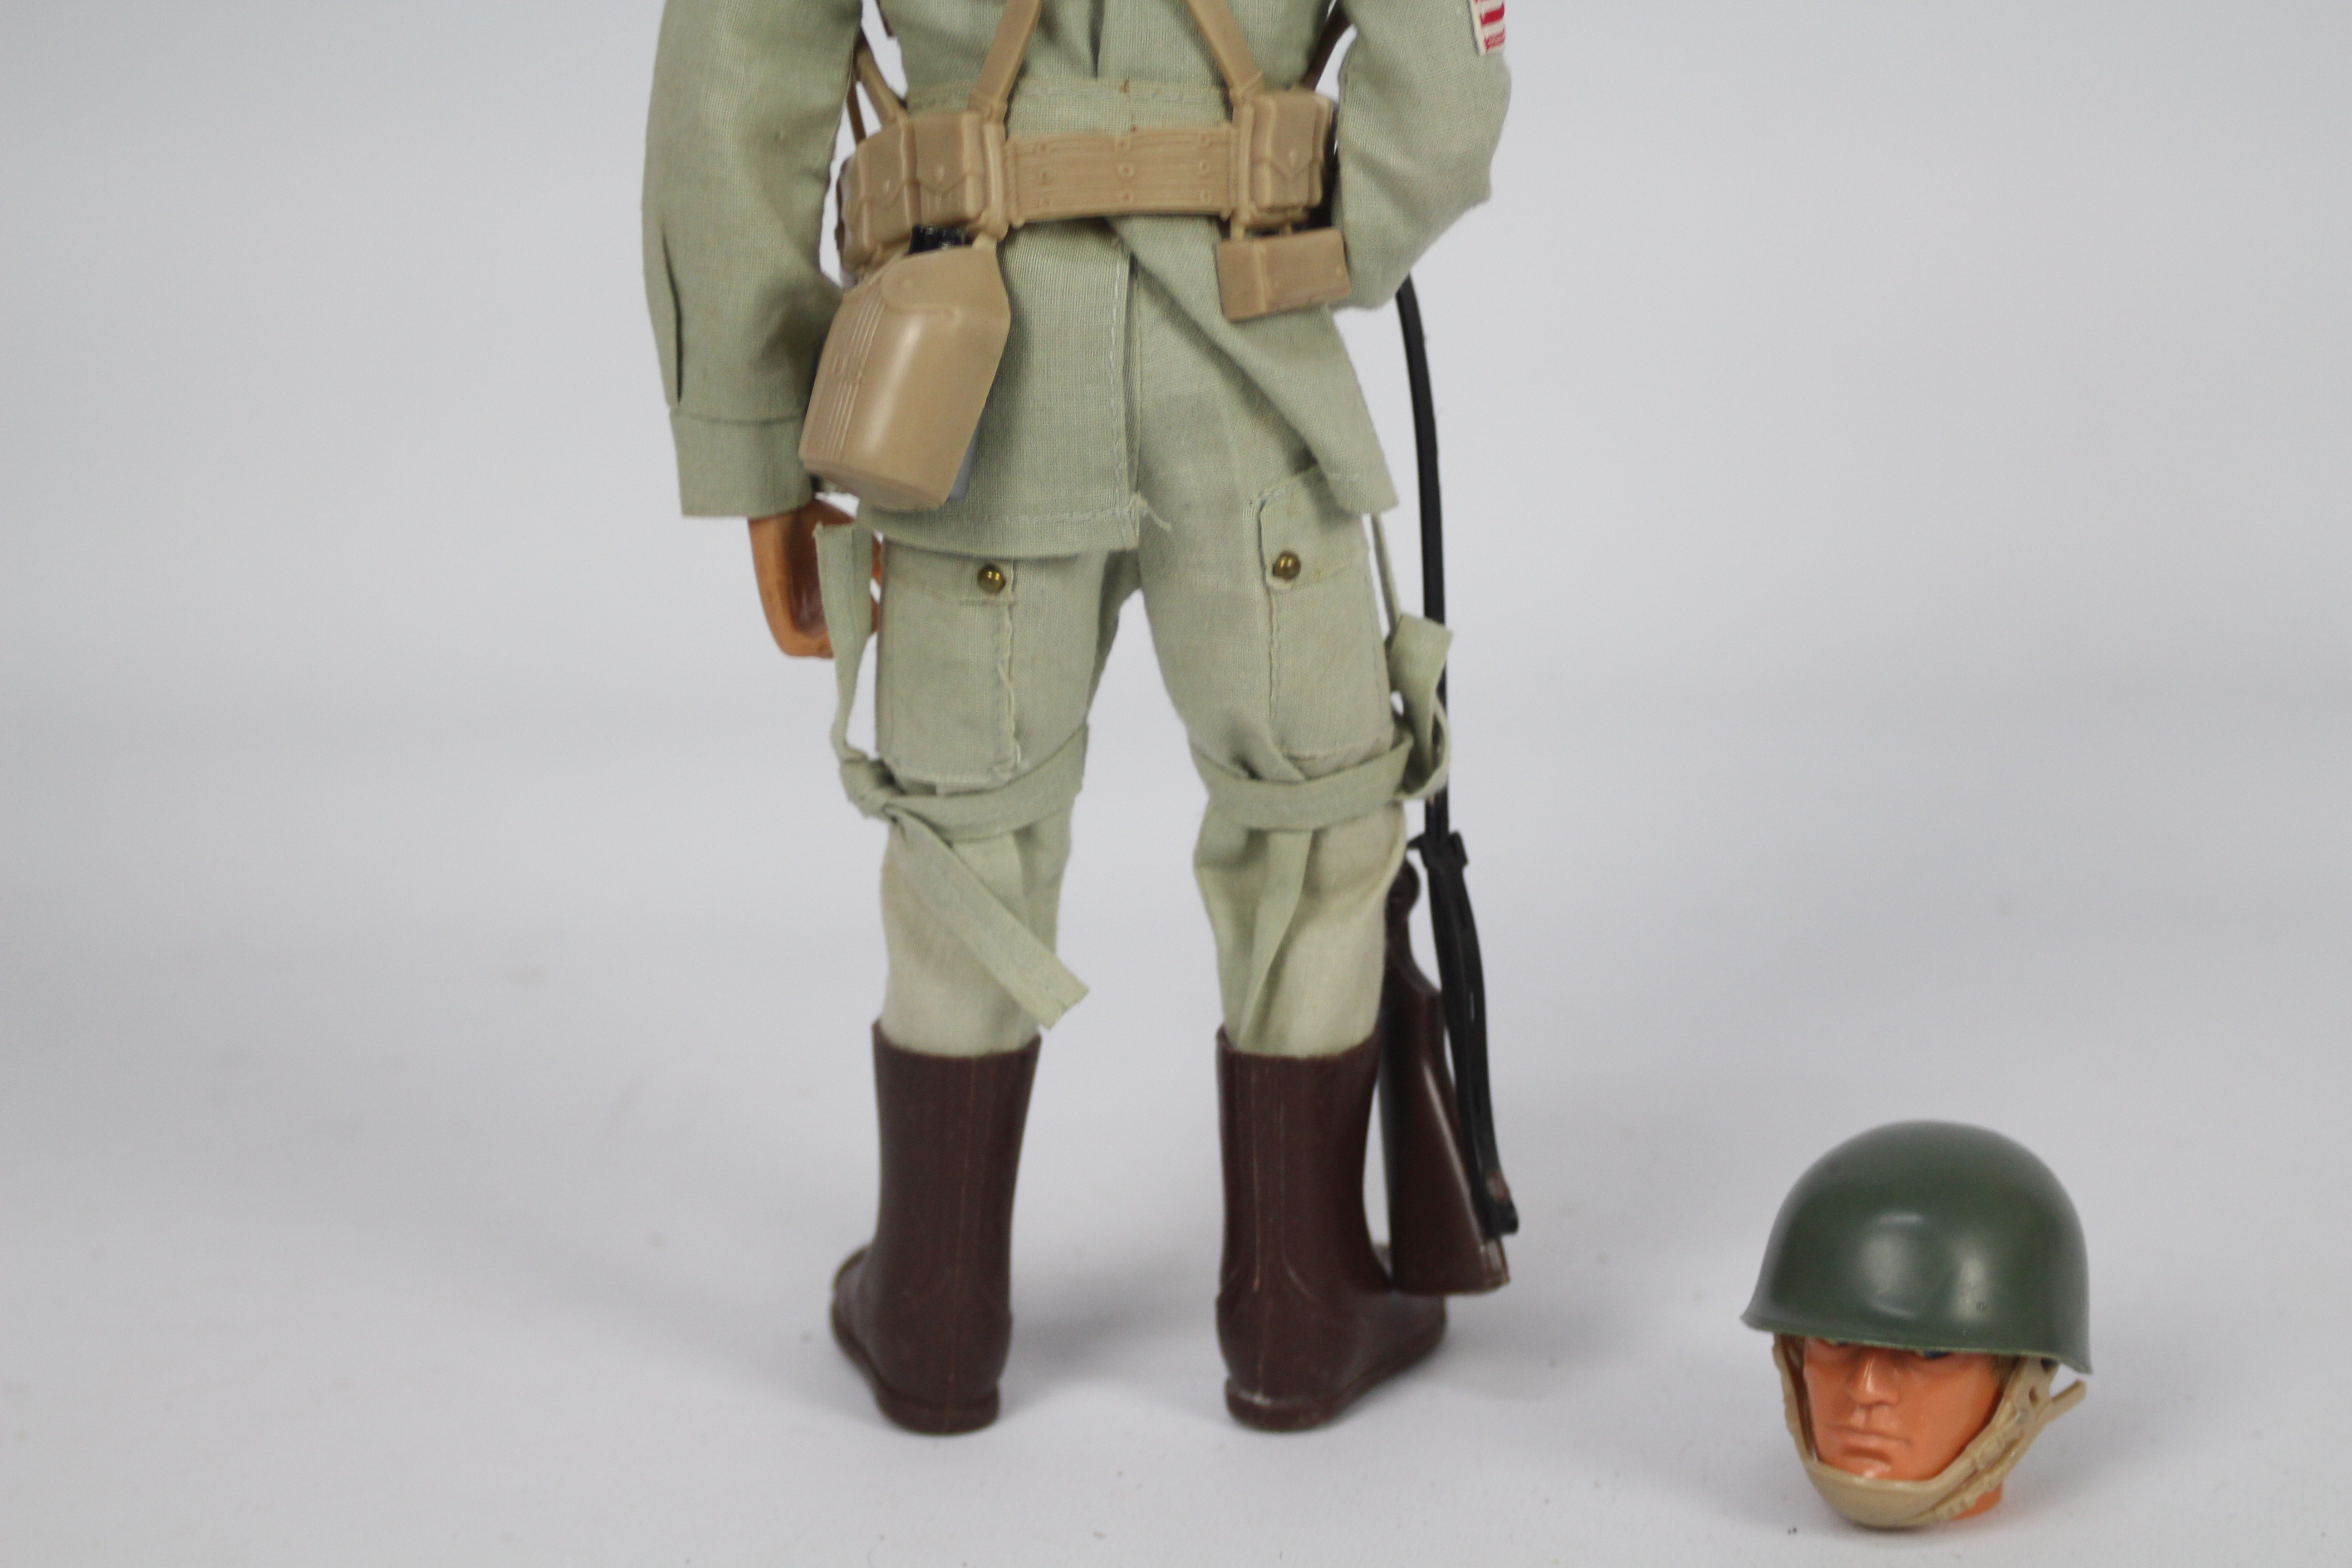 Palitoy, Action Man - A Palitoy Action Man figure in US Paratrooper outfit. - Image 7 of 7